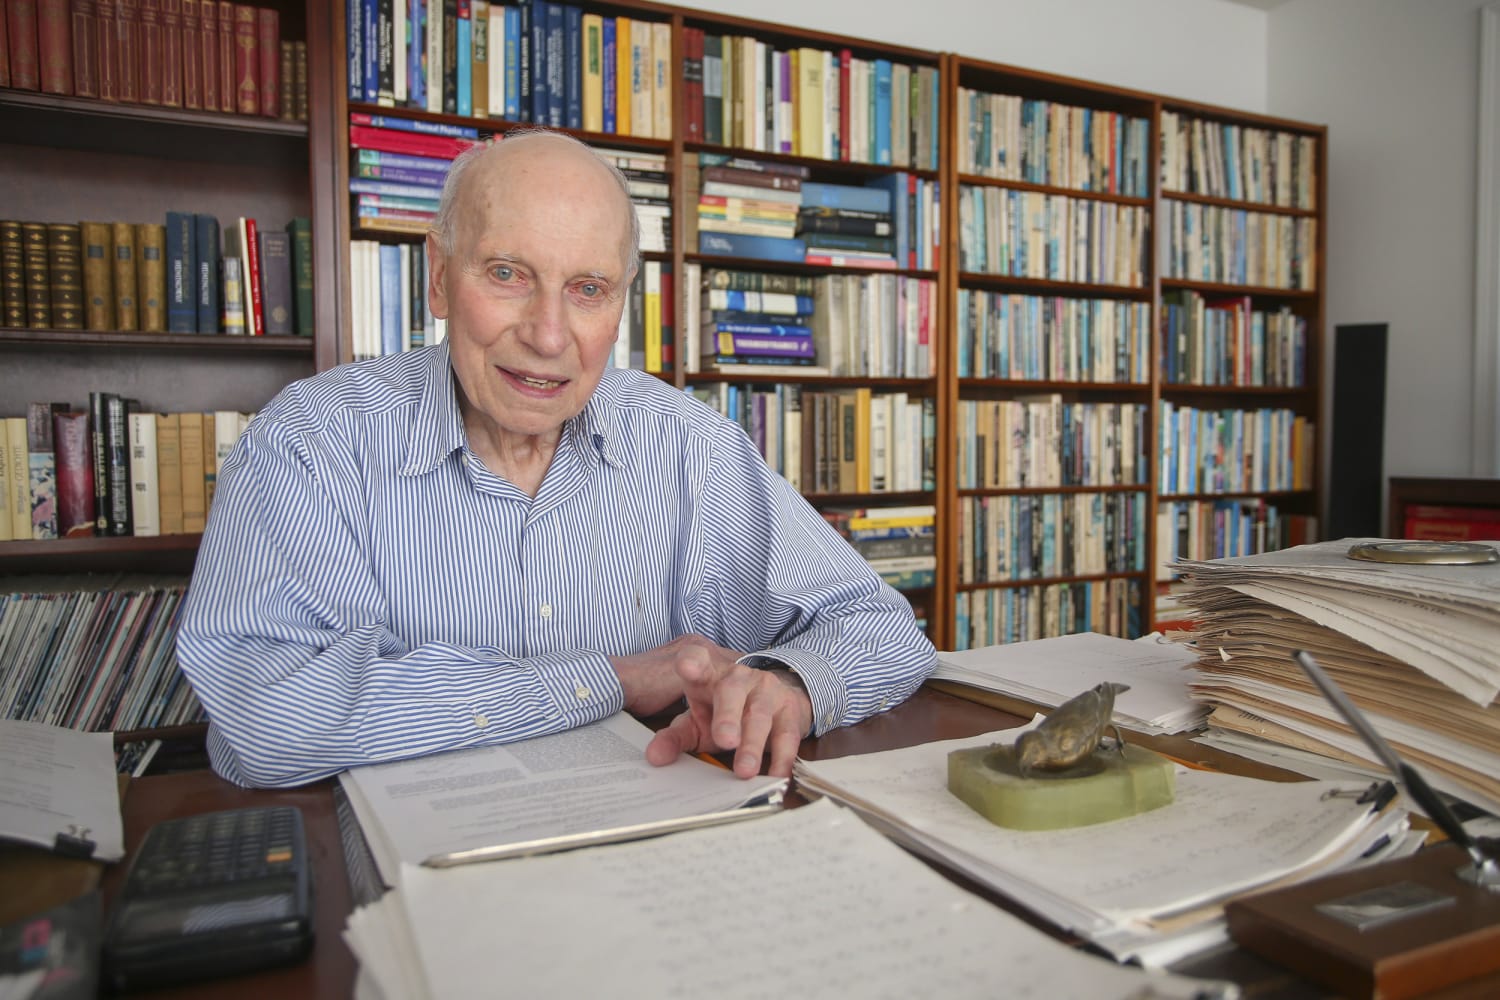 Man, 89, achieves lifelong dream of earning Ph.d in physics